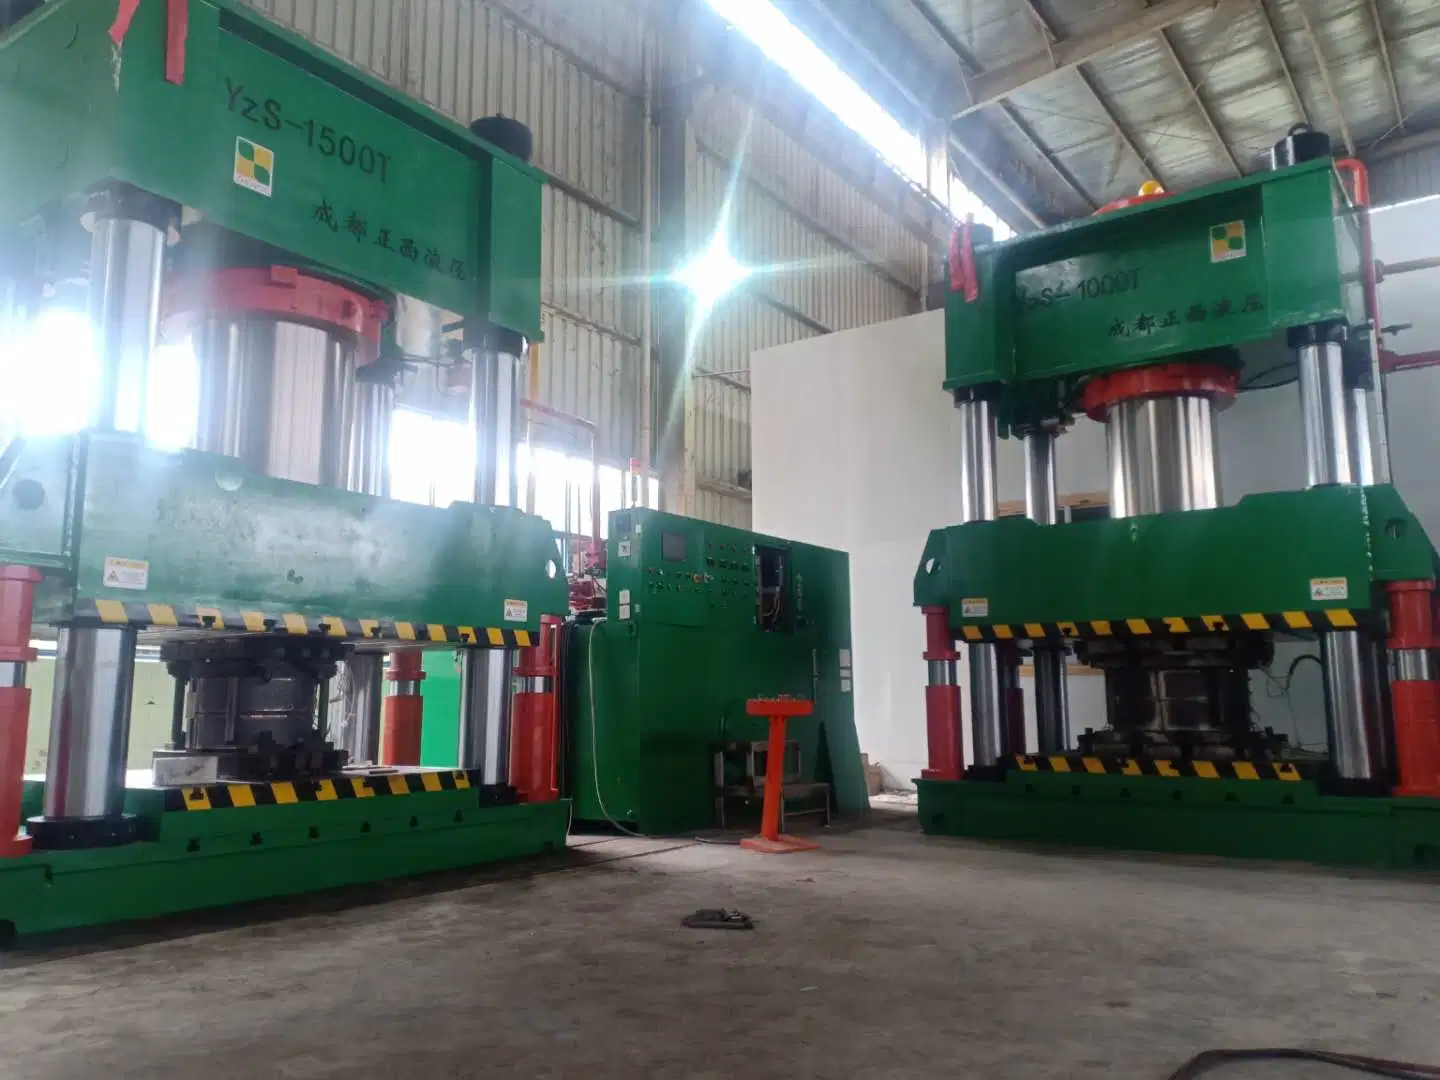 500 Ton Cold Forge Hydraulic Press Machine for Joint, Gear and Bearing